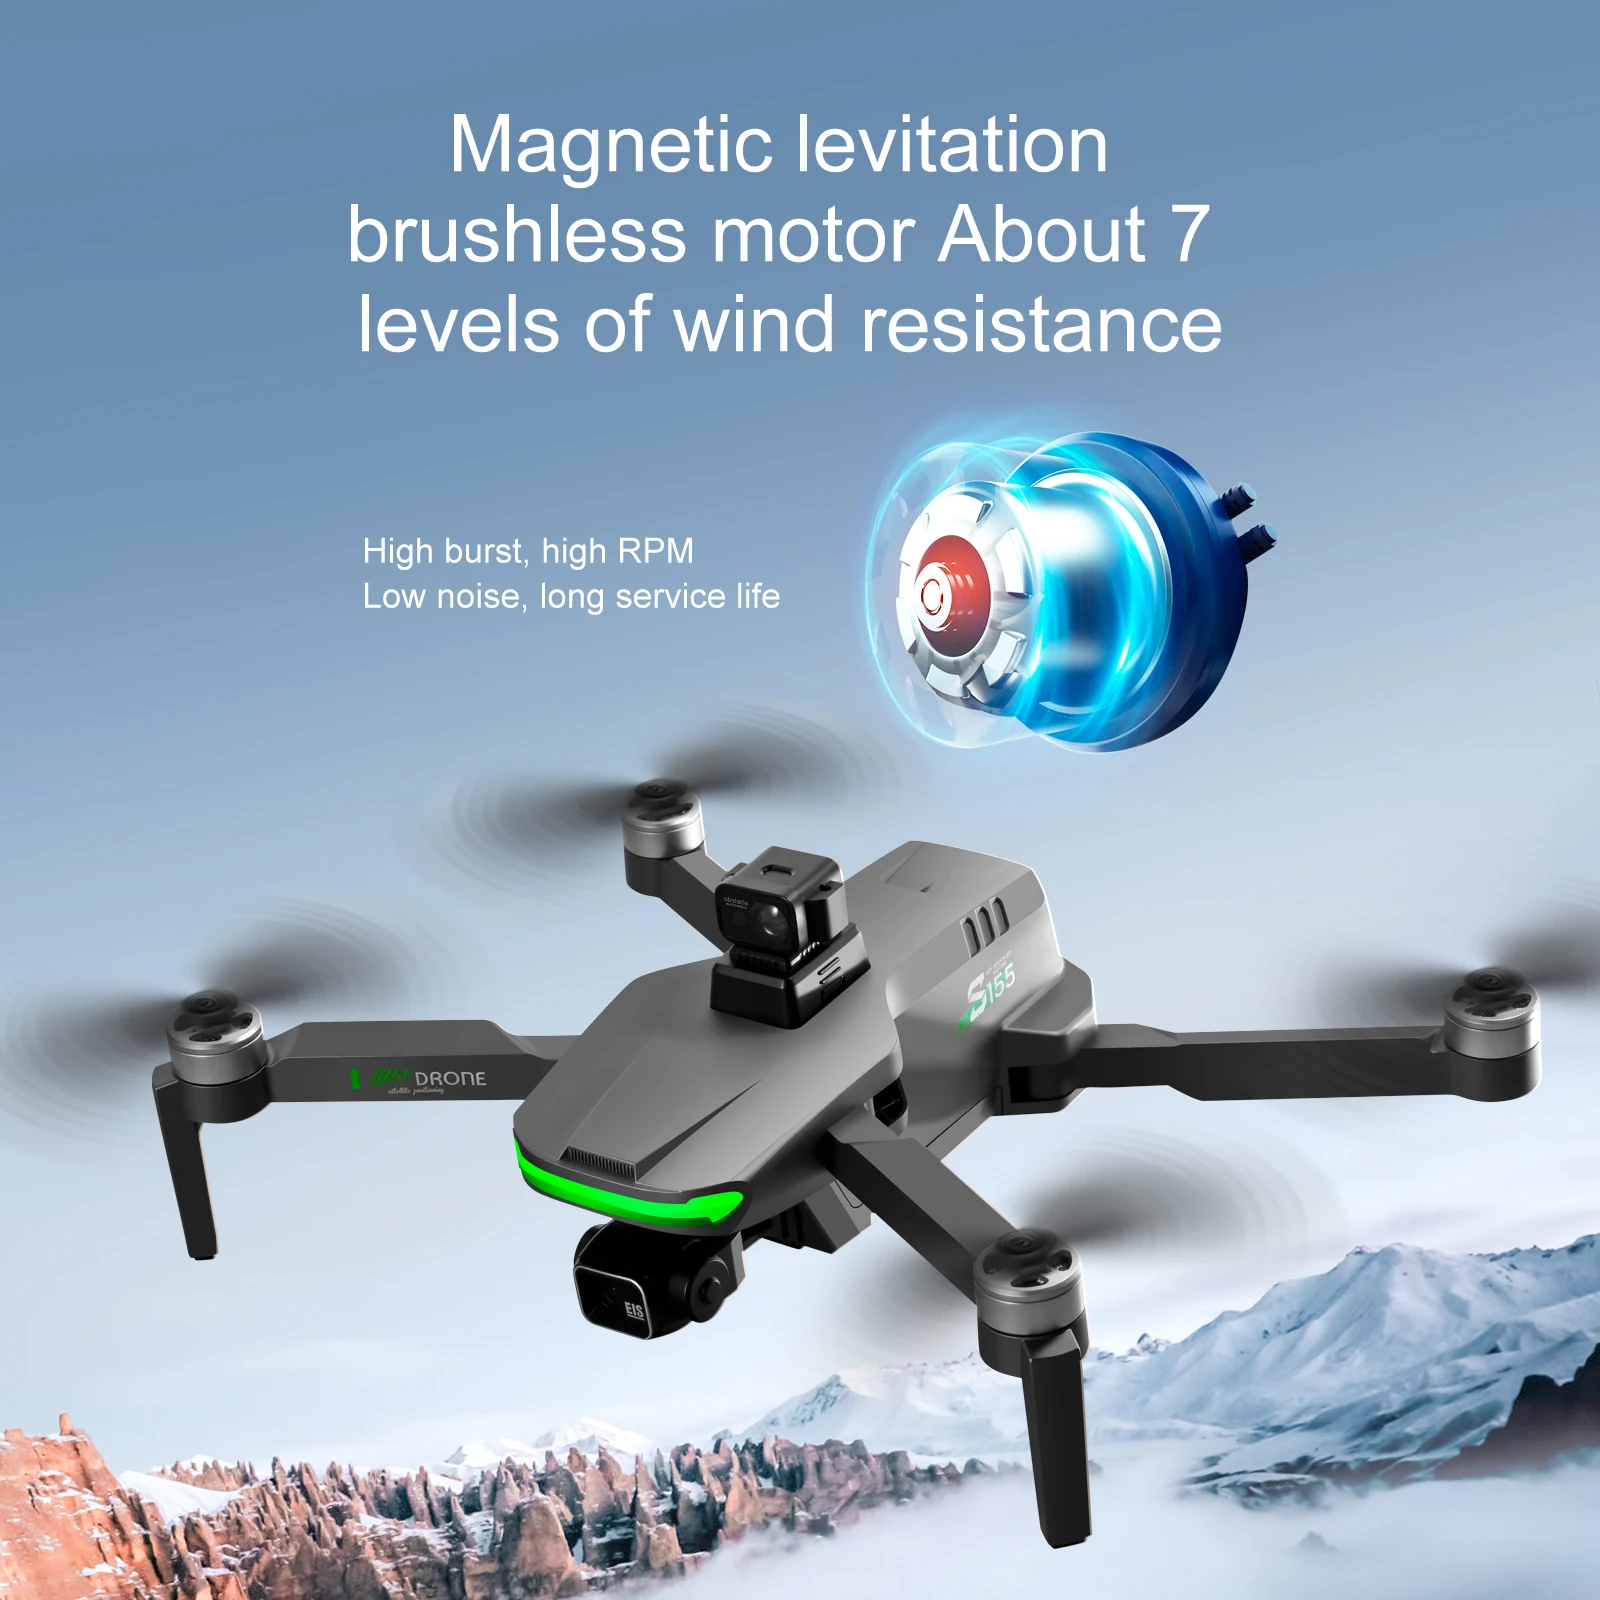 S155 Pro GPS Drone, magnetic levitation brushless motor About 7 levels of wind resistance High burst; high